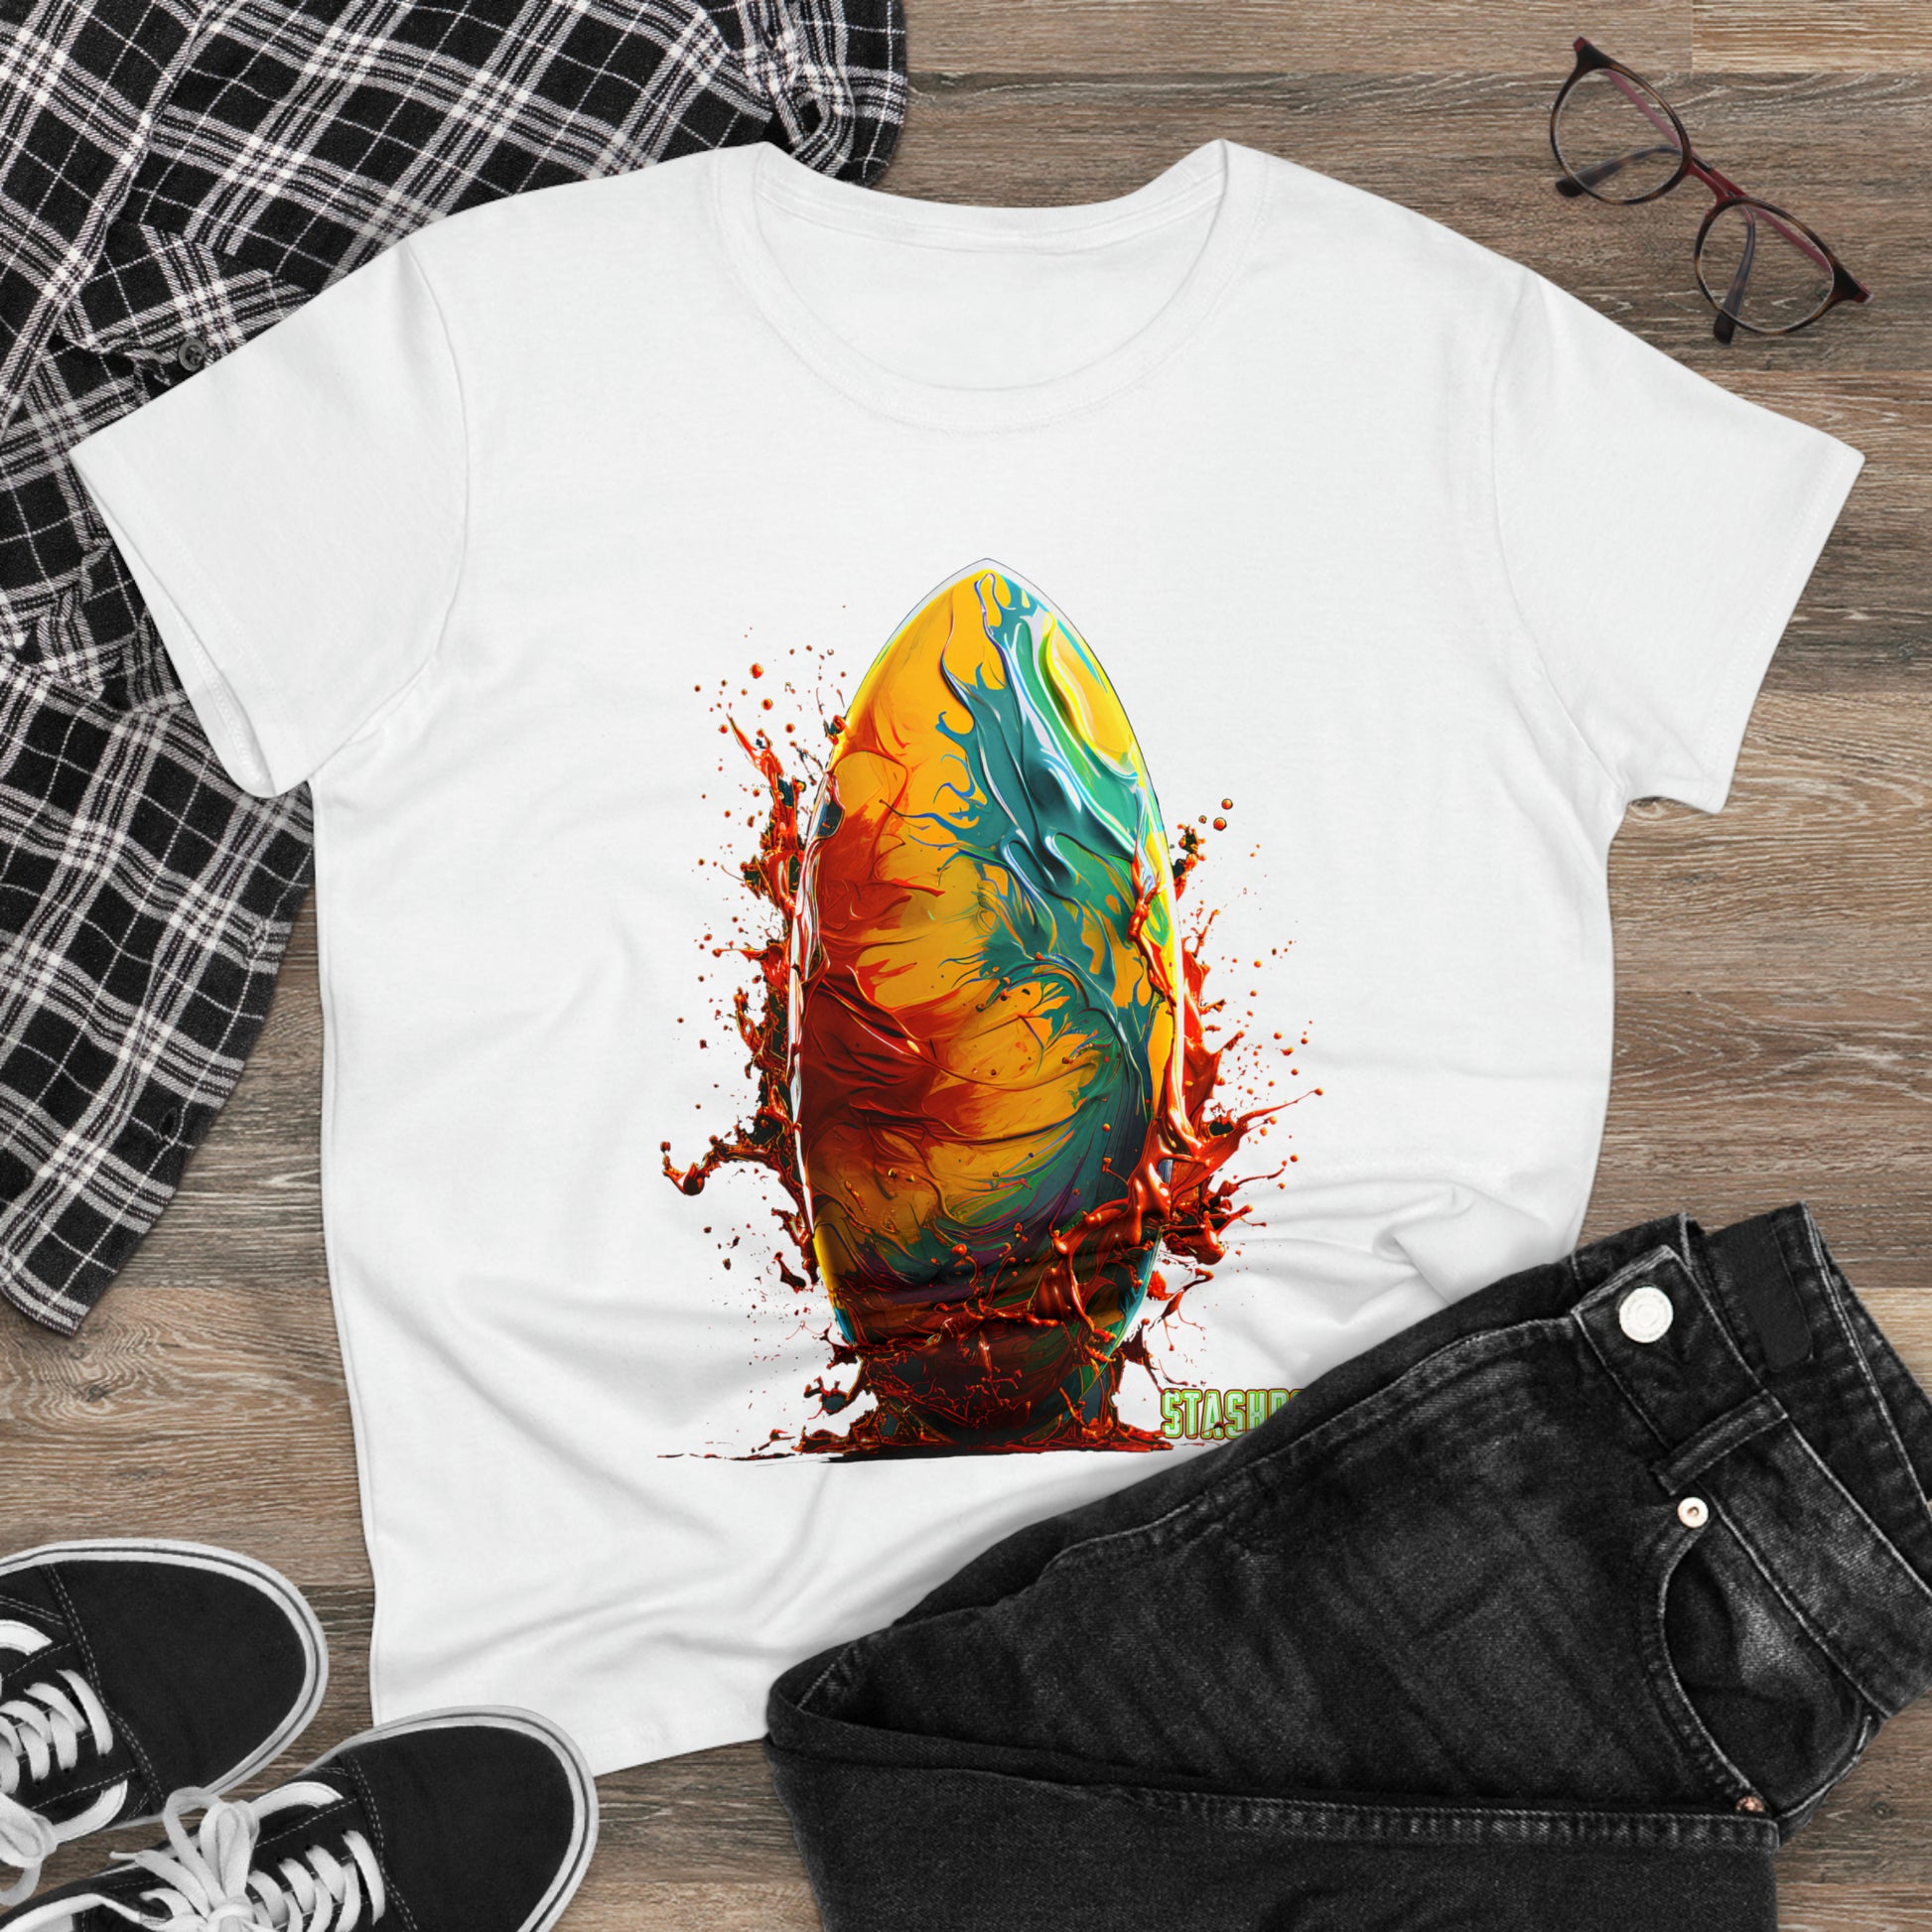 Surf in Style: Dive into the colorful world of surfboard art with our Women's Midweight Cotton Tee - Surfboard Design #009. Vibrant paint strokes meet comfortable fabric, making this tee perfect for beach days and beyond. 🌊👚 #SurfboardArtistry #BeachFashion #StashboxTees